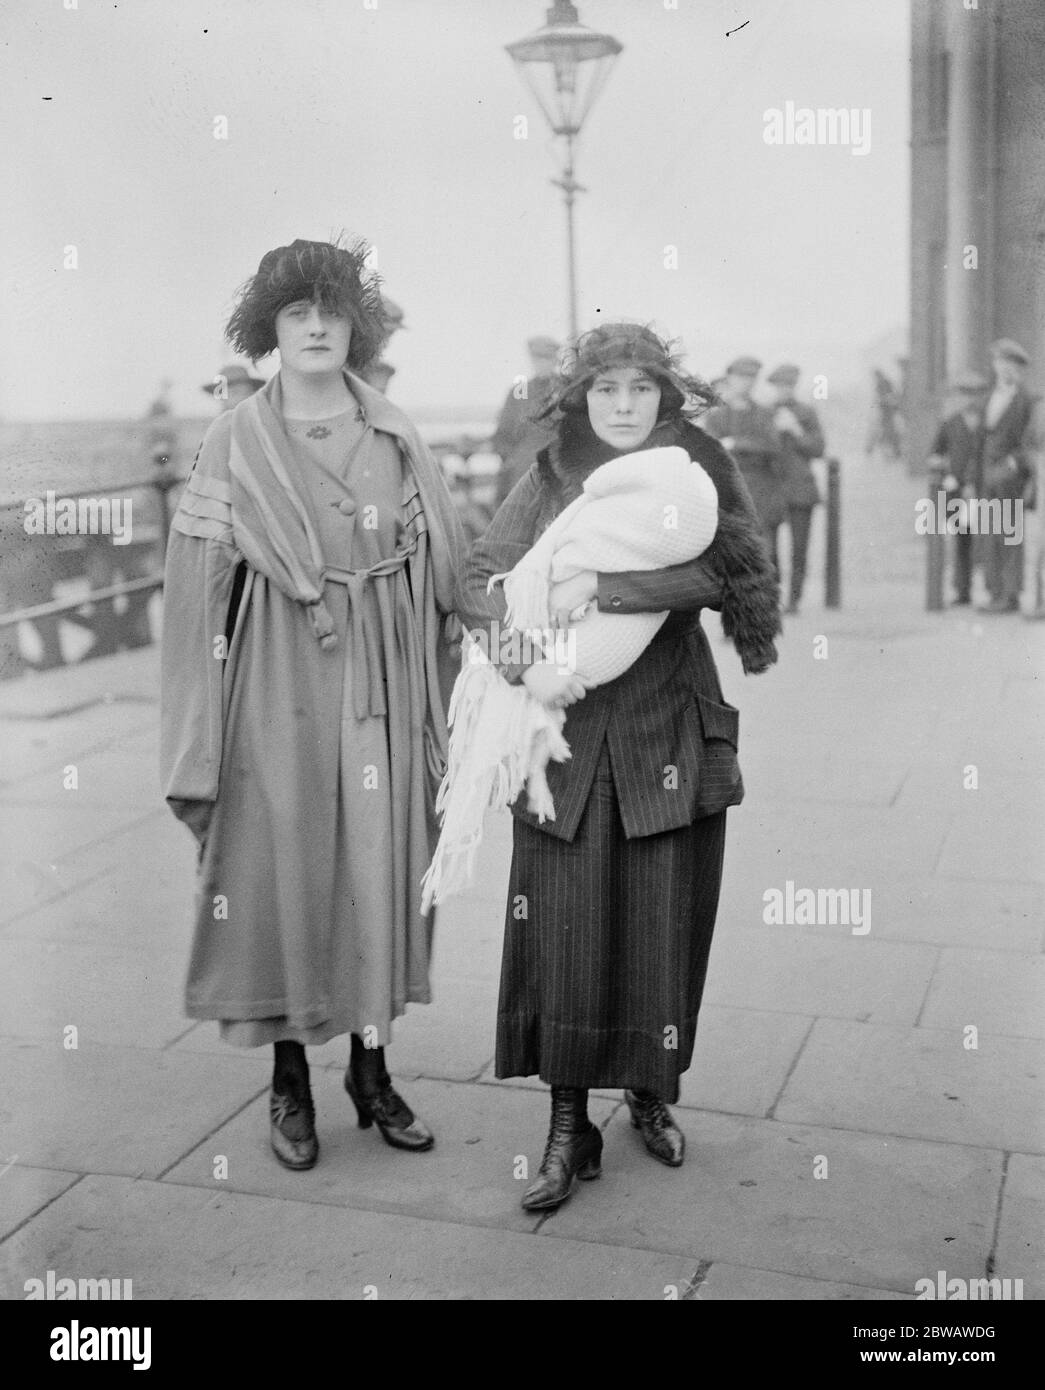 Latest Photographs From Scene of Great Airship Disaster R38 ZR-2 Mrs W Julius Steal ( On left ) the English wife of one of the American sailors who perished in the disaster . She was married on the 4th July Independence day 1921 in England . On right is seen Mrs Julius , the American wife of one of the American sailors with her three week old baby 25 August 1921 Stock Photo